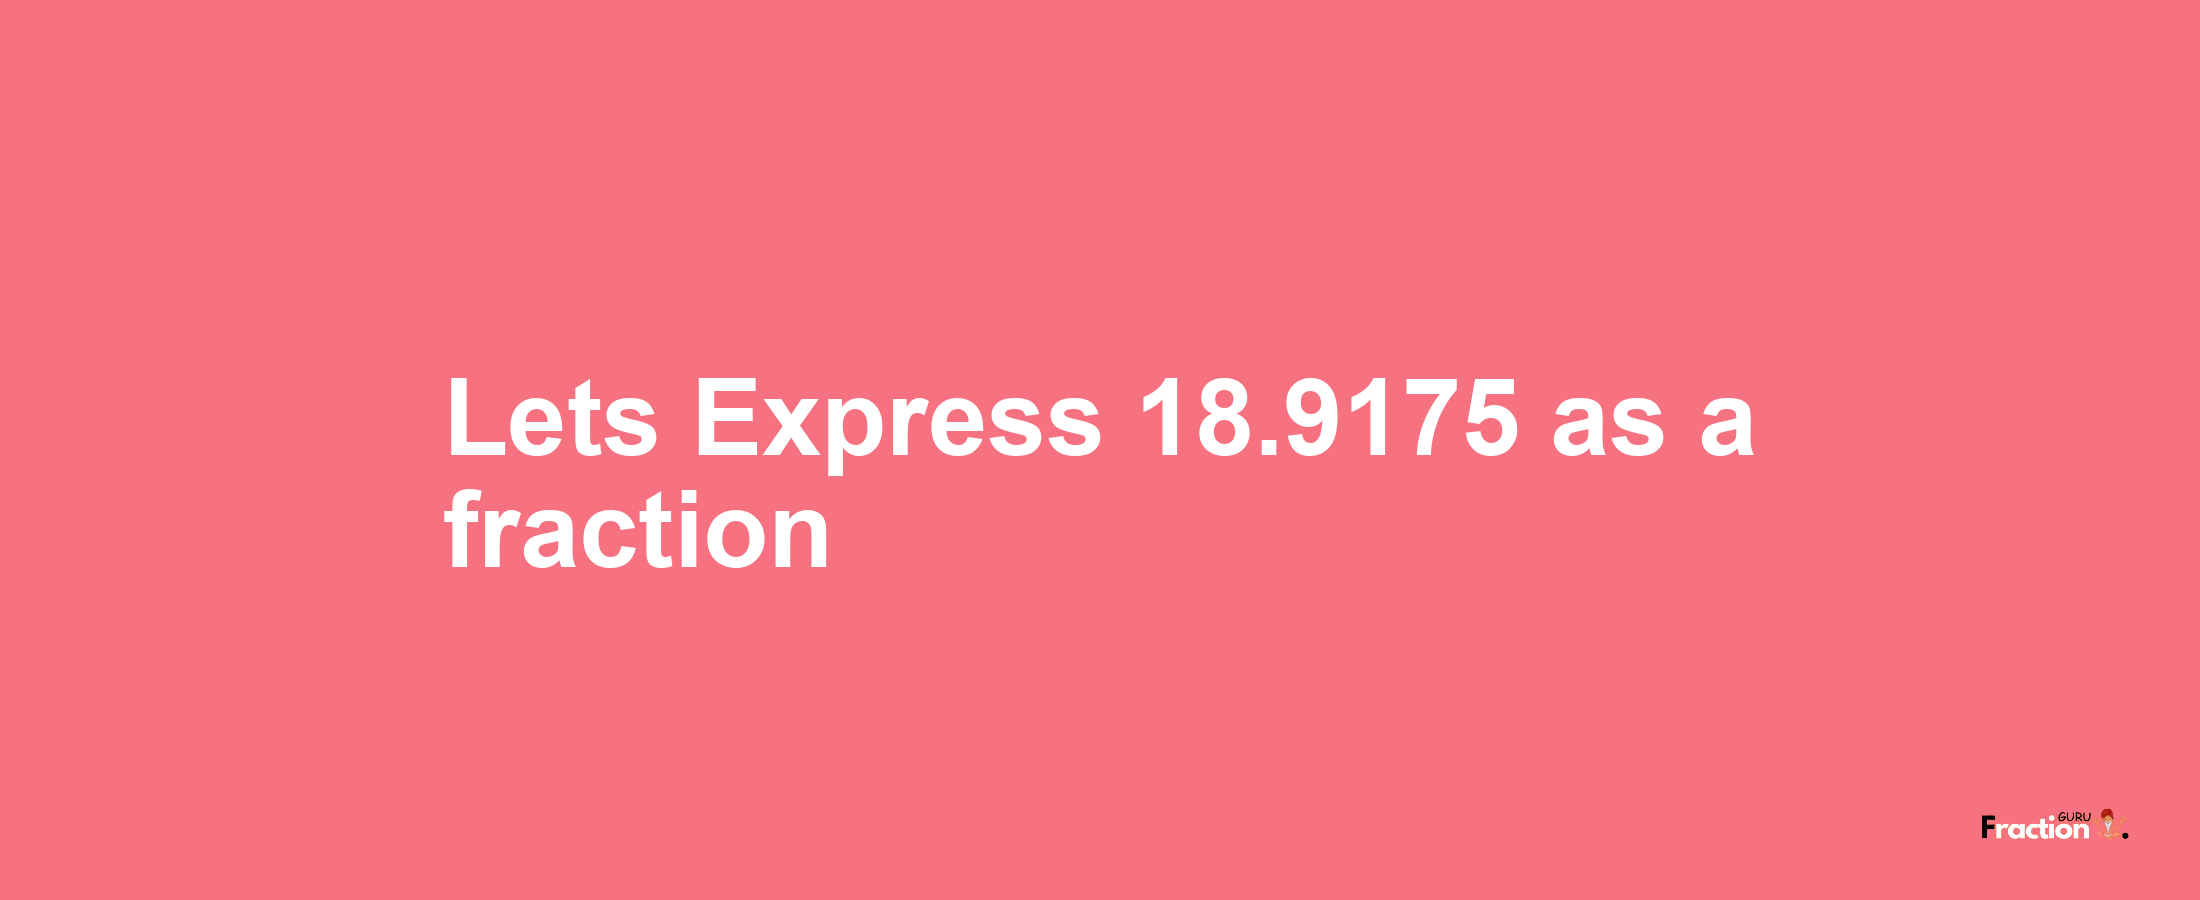 Lets Express 18.9175 as afraction